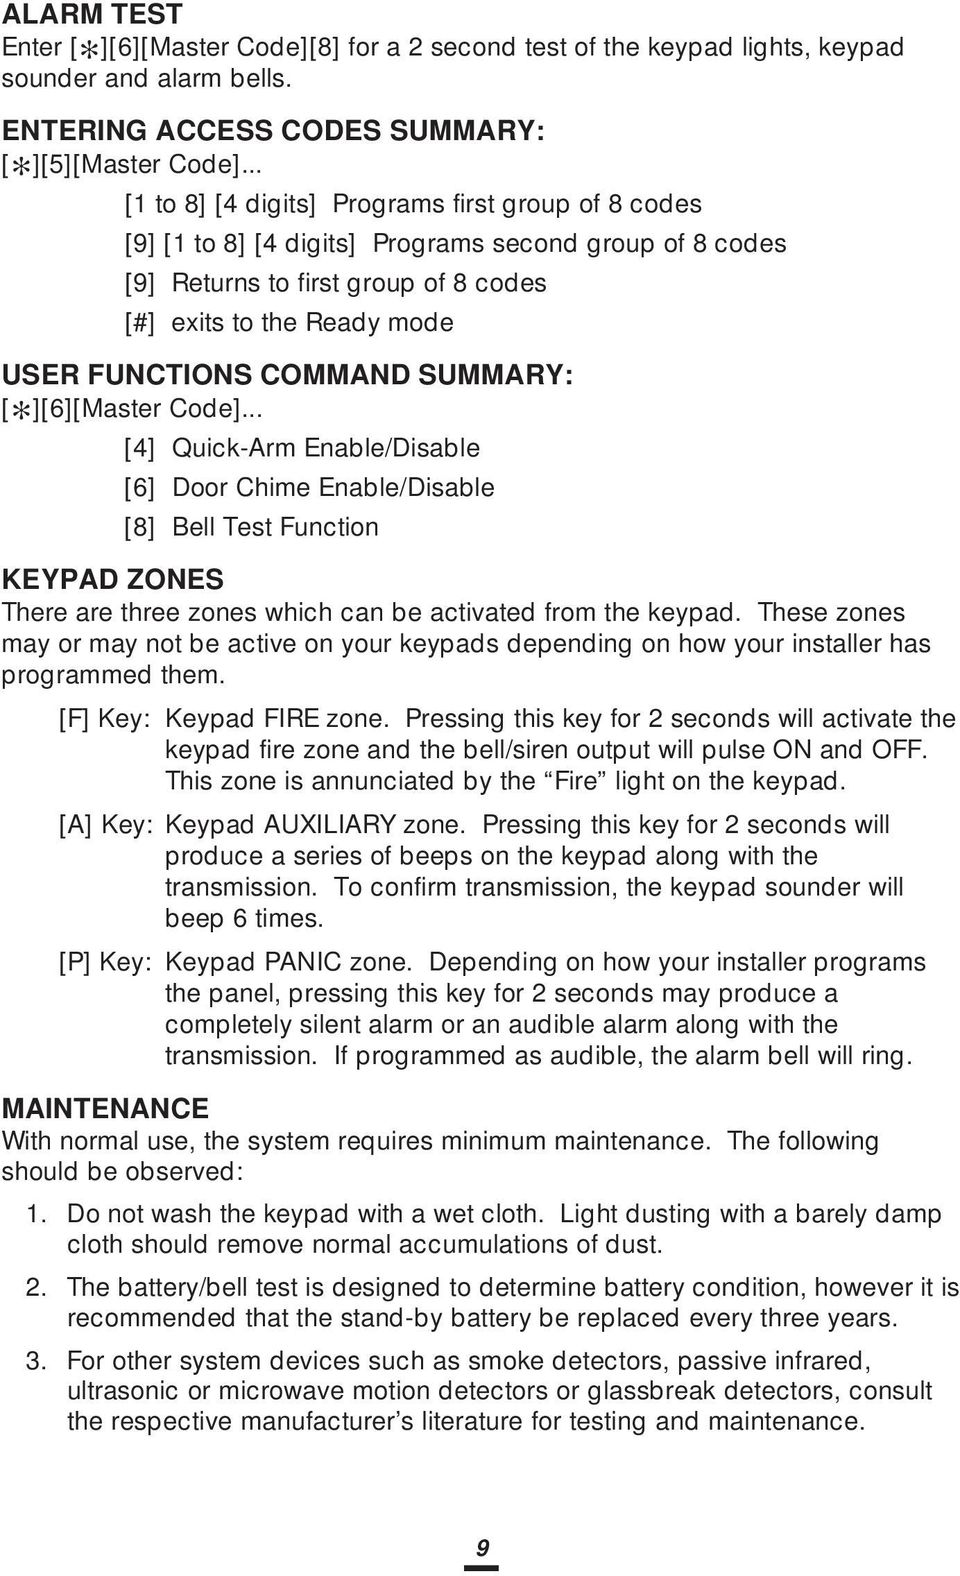 COMMAND SUMMARY: [ ][6][Master Code]... [4] Quick-Arm Enable/Disable [6] Door Chime Enable/Disable [8] Bell Test Function KEYPAD ZONES There are three zones which can be activated from the keypad.